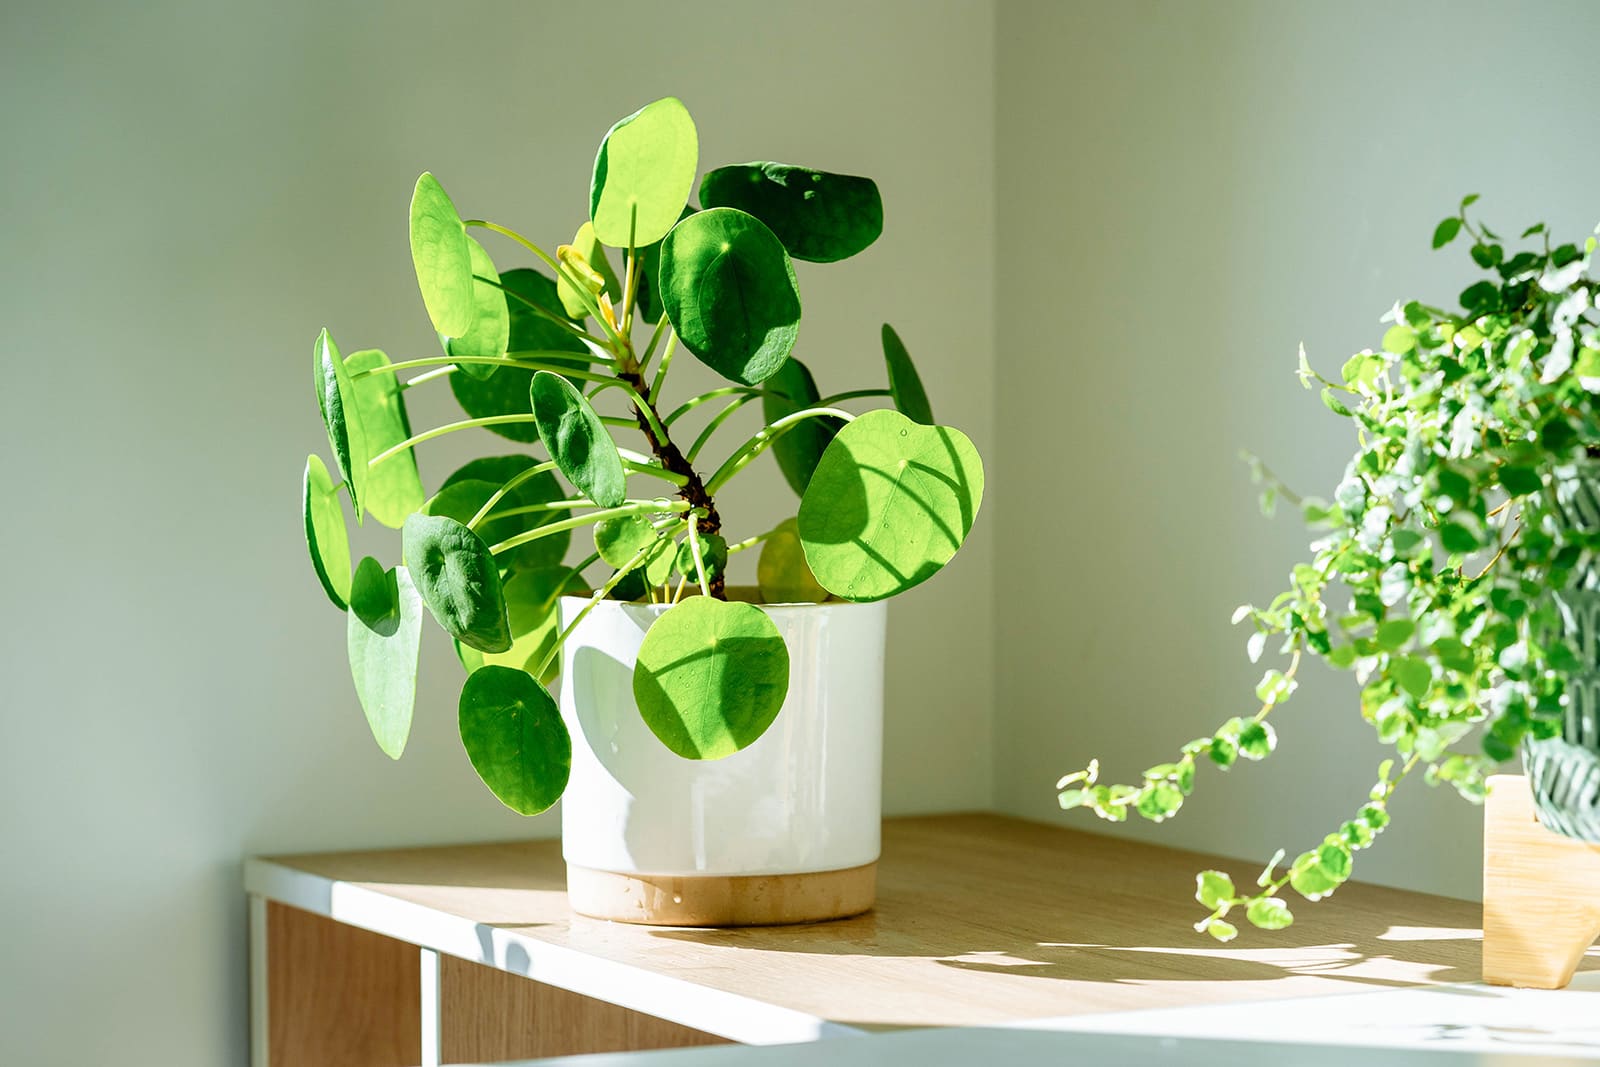 Glowing light on a Chinese money plant in a white ceramic vase on a wooden bookcase